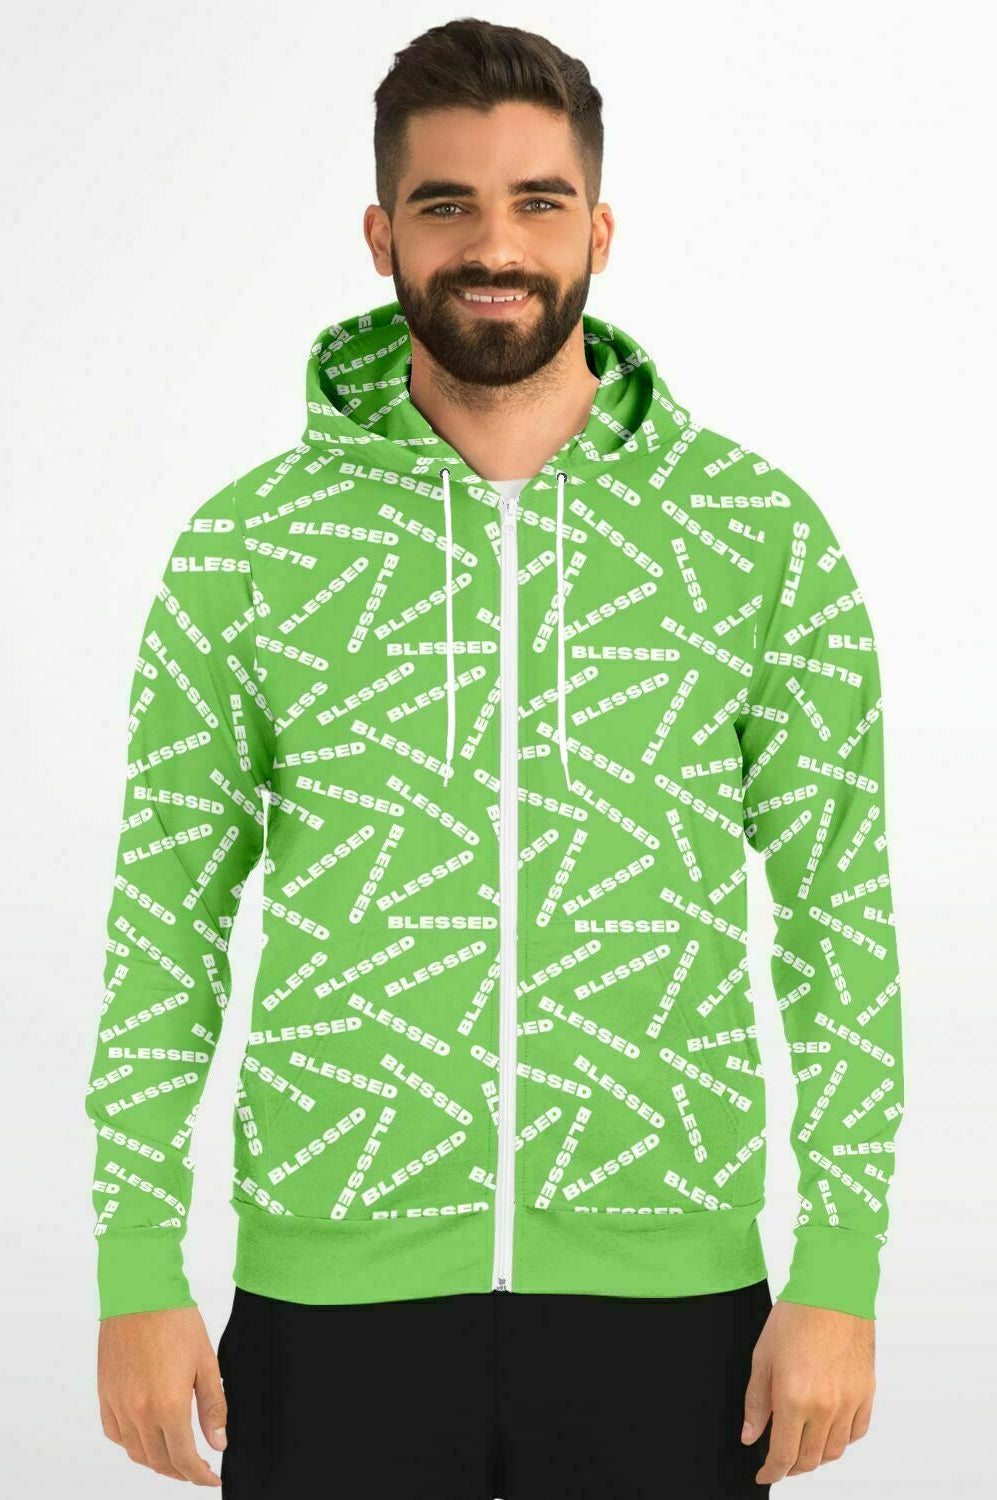 BLESSED Green Fashion Zip-Up Hoodie Get Blessed Now